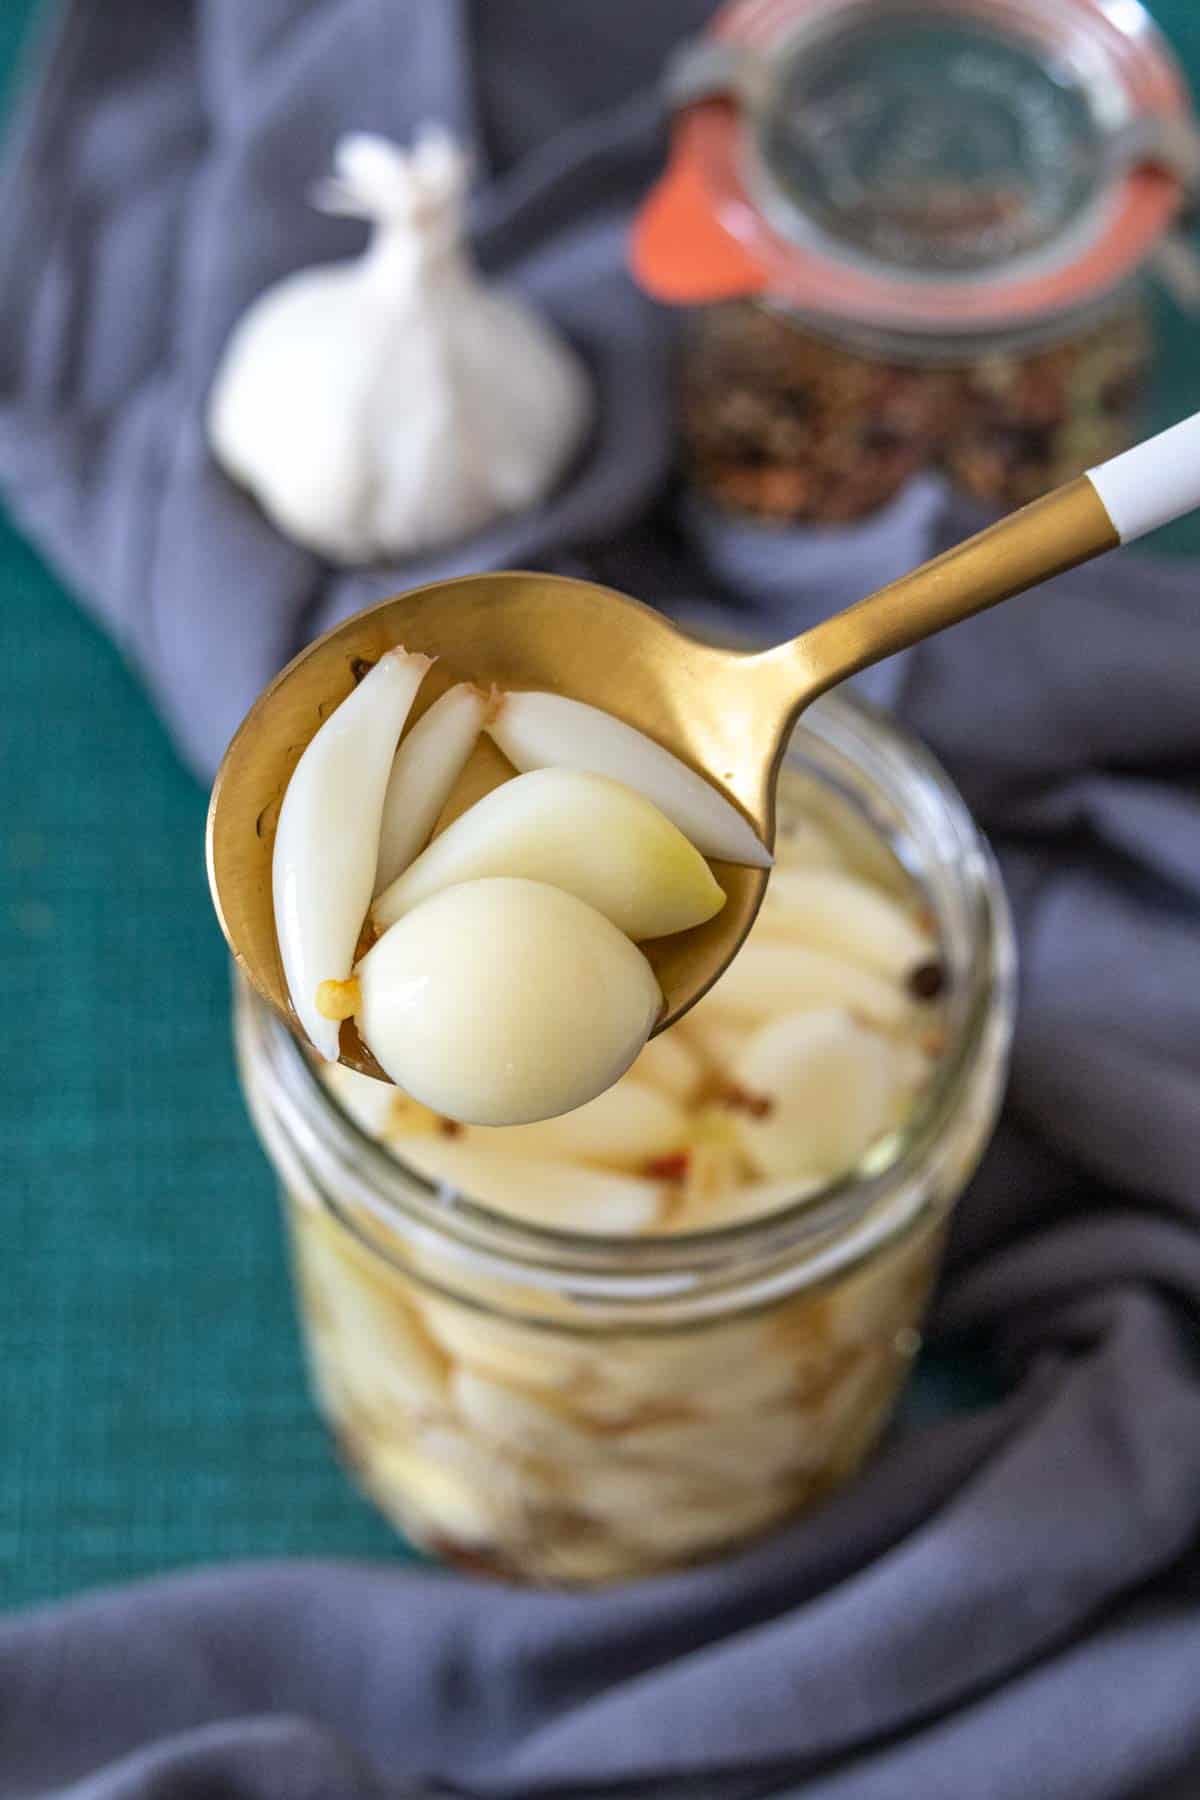 pickled garlic cloves on a gold spoon with white handle